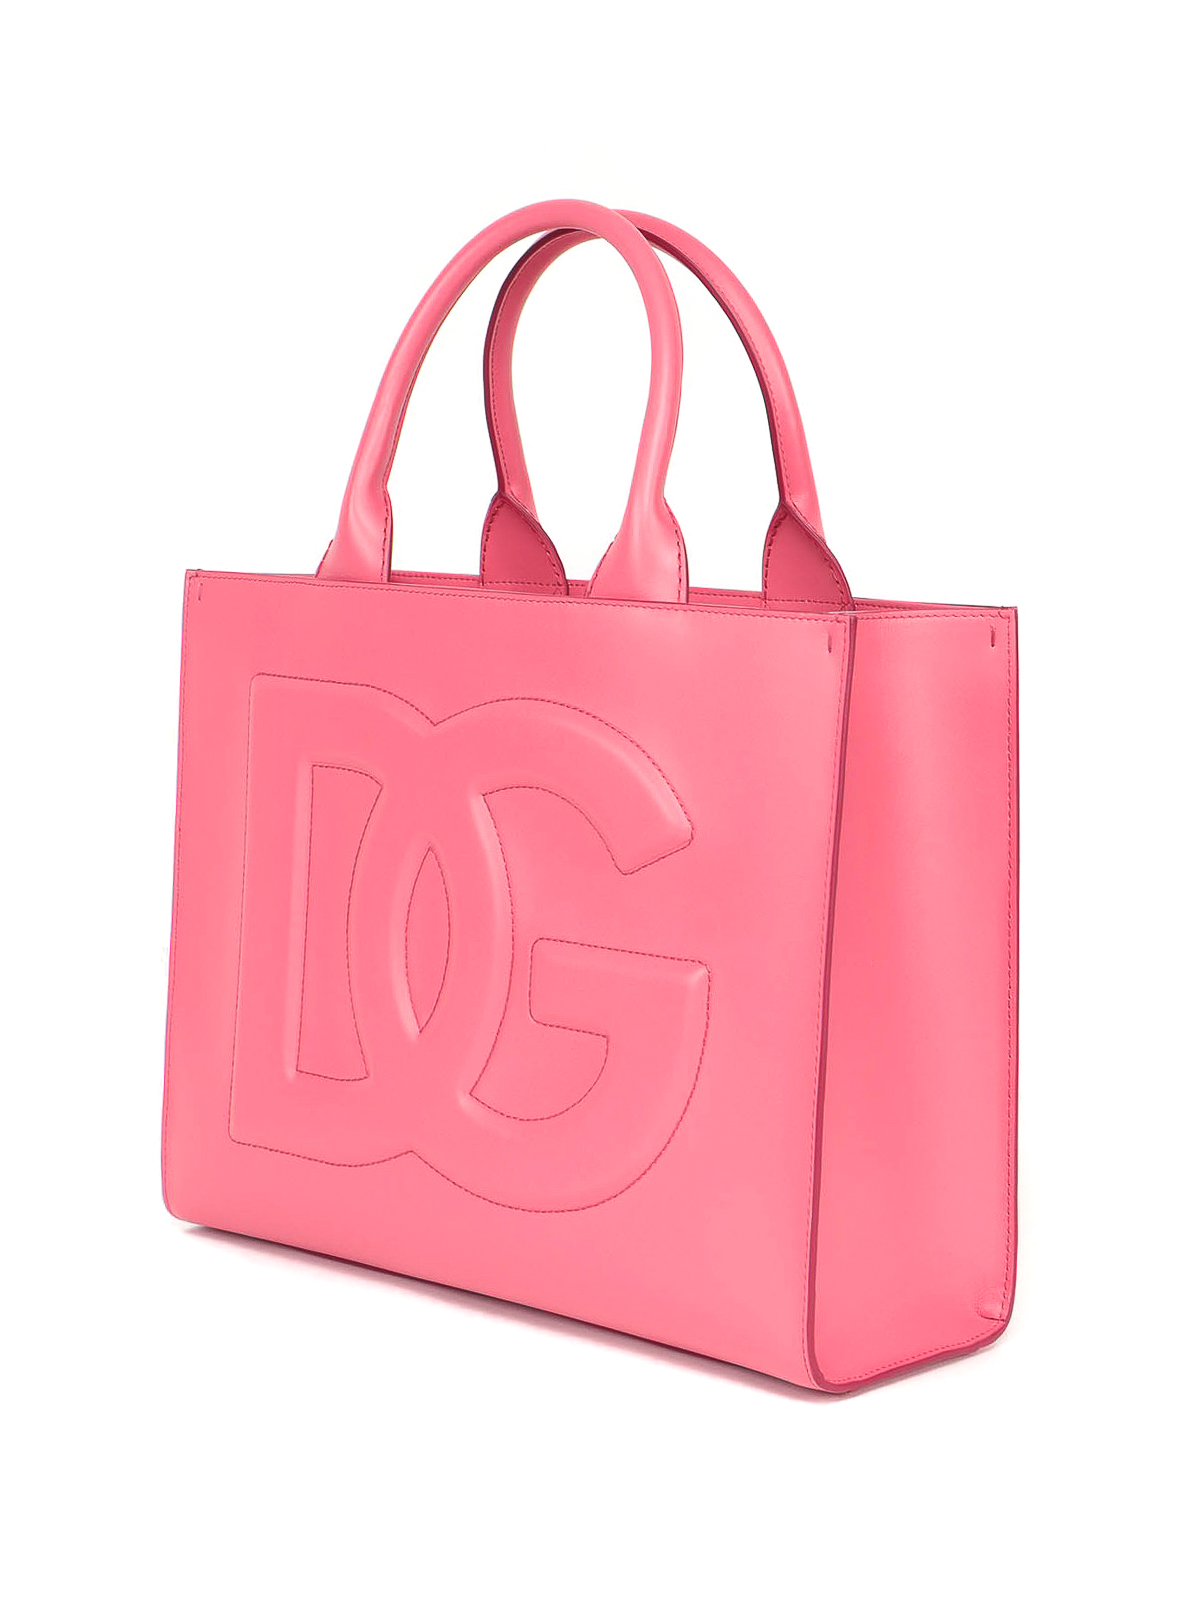 Totes bags Dolce & Gabbana - DG Daily L leather shopping bag